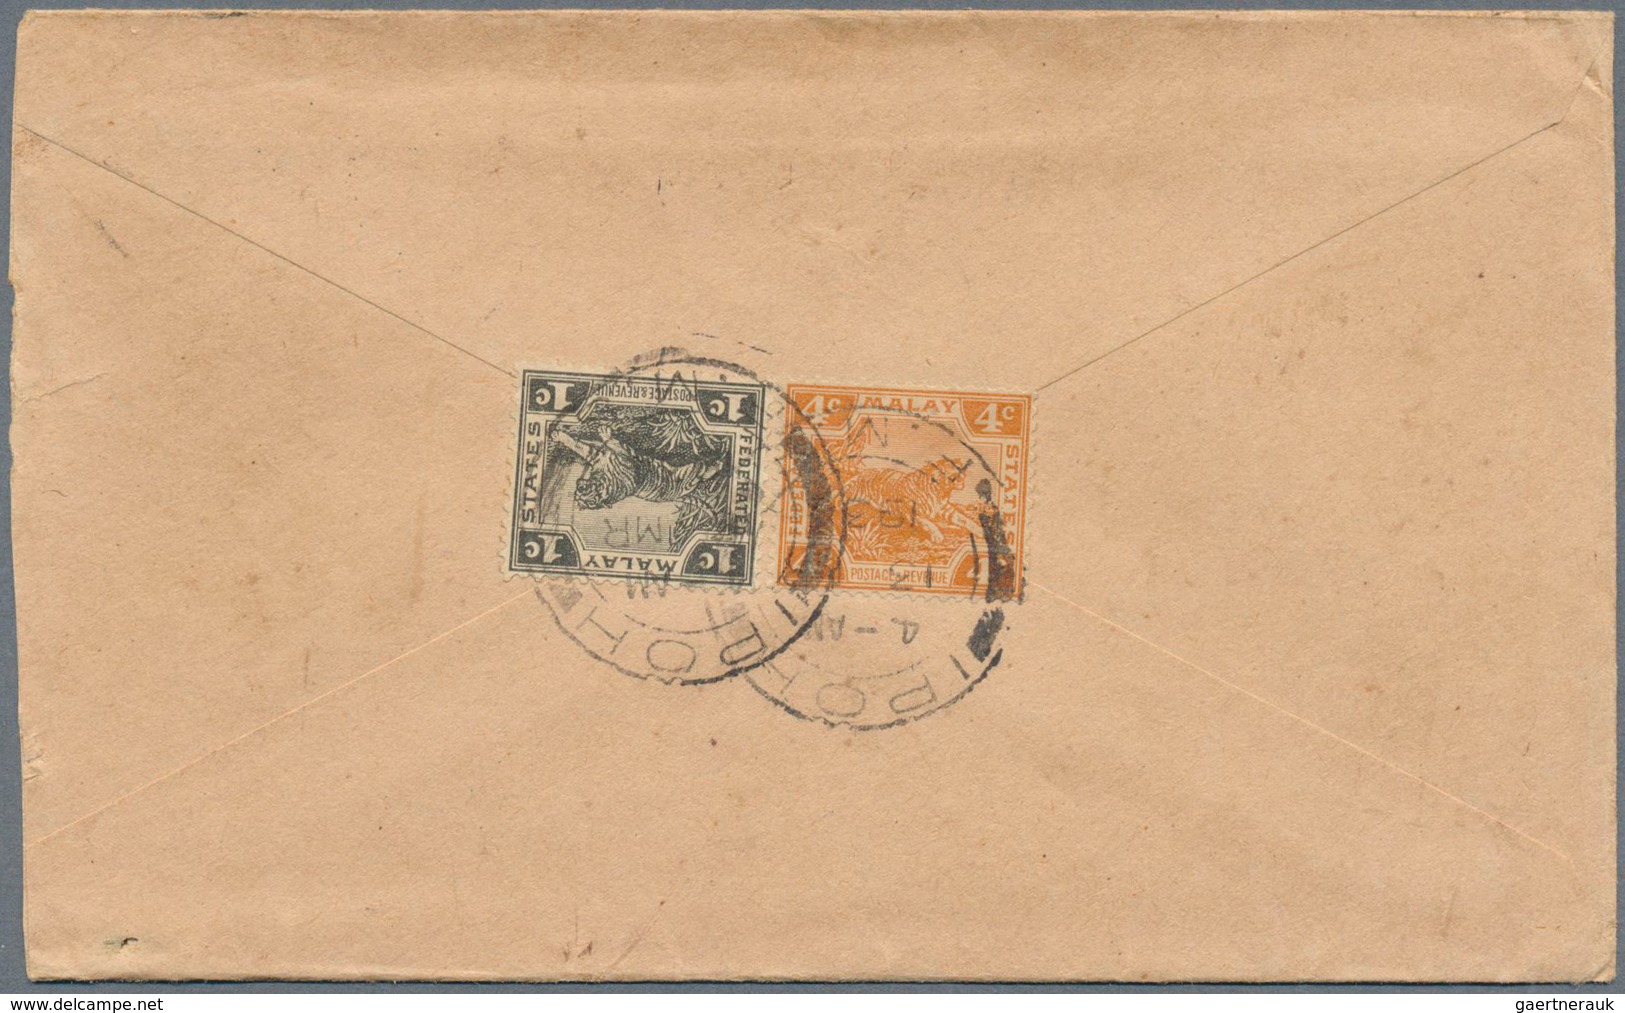 Malaiische Staaten - Perak: 1936/1950, Three Letters All Stamped With Different "TRAIN LETTER" Marks - Perak